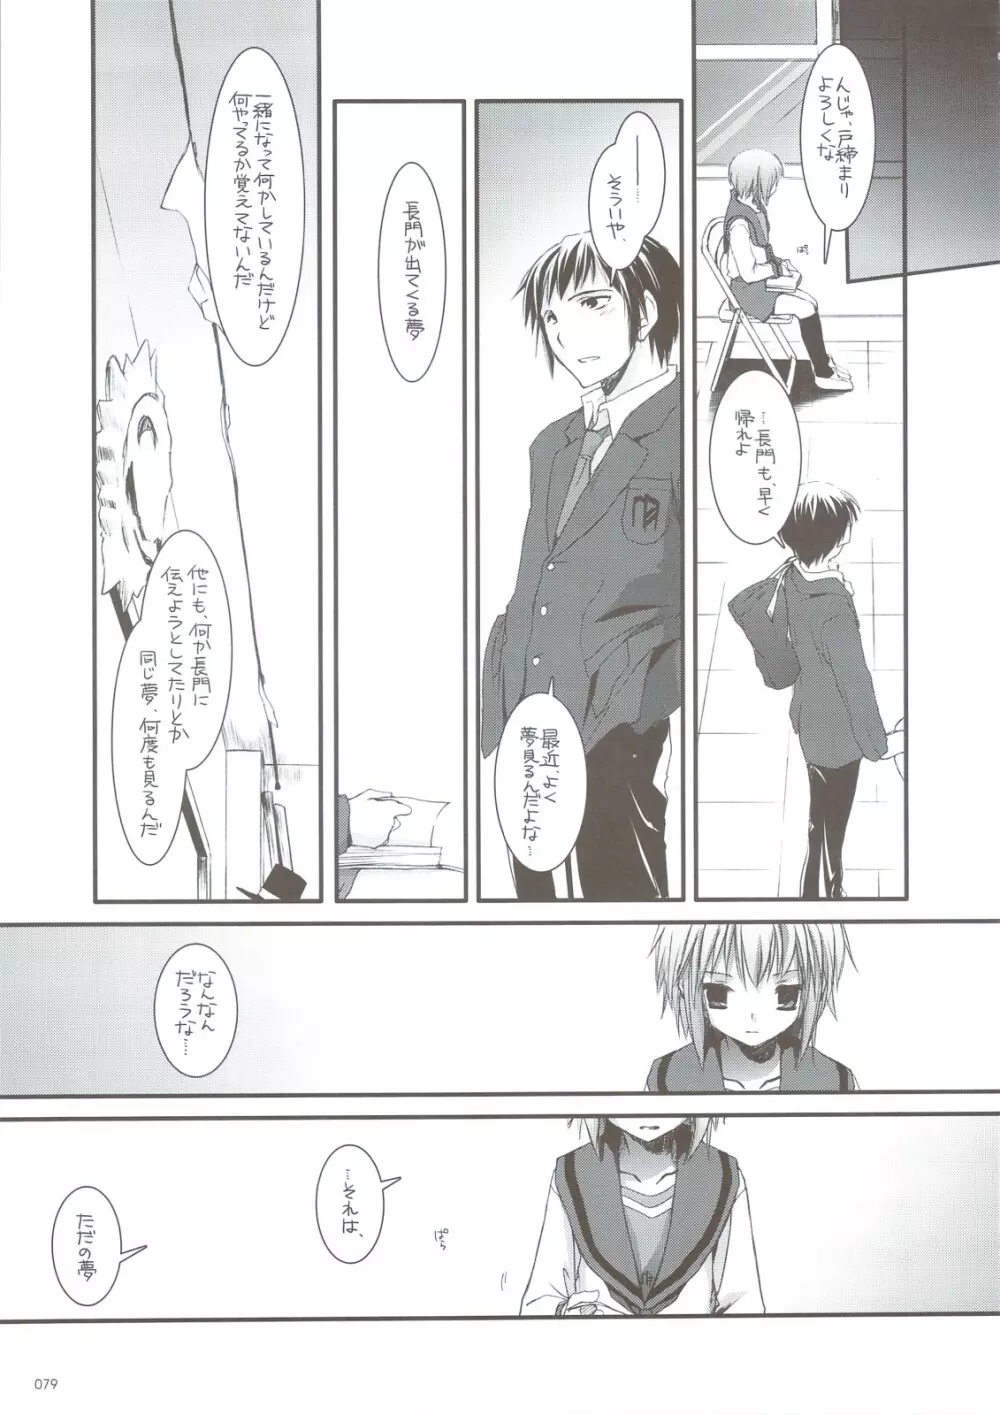 DL-SOS 総集編 - page78